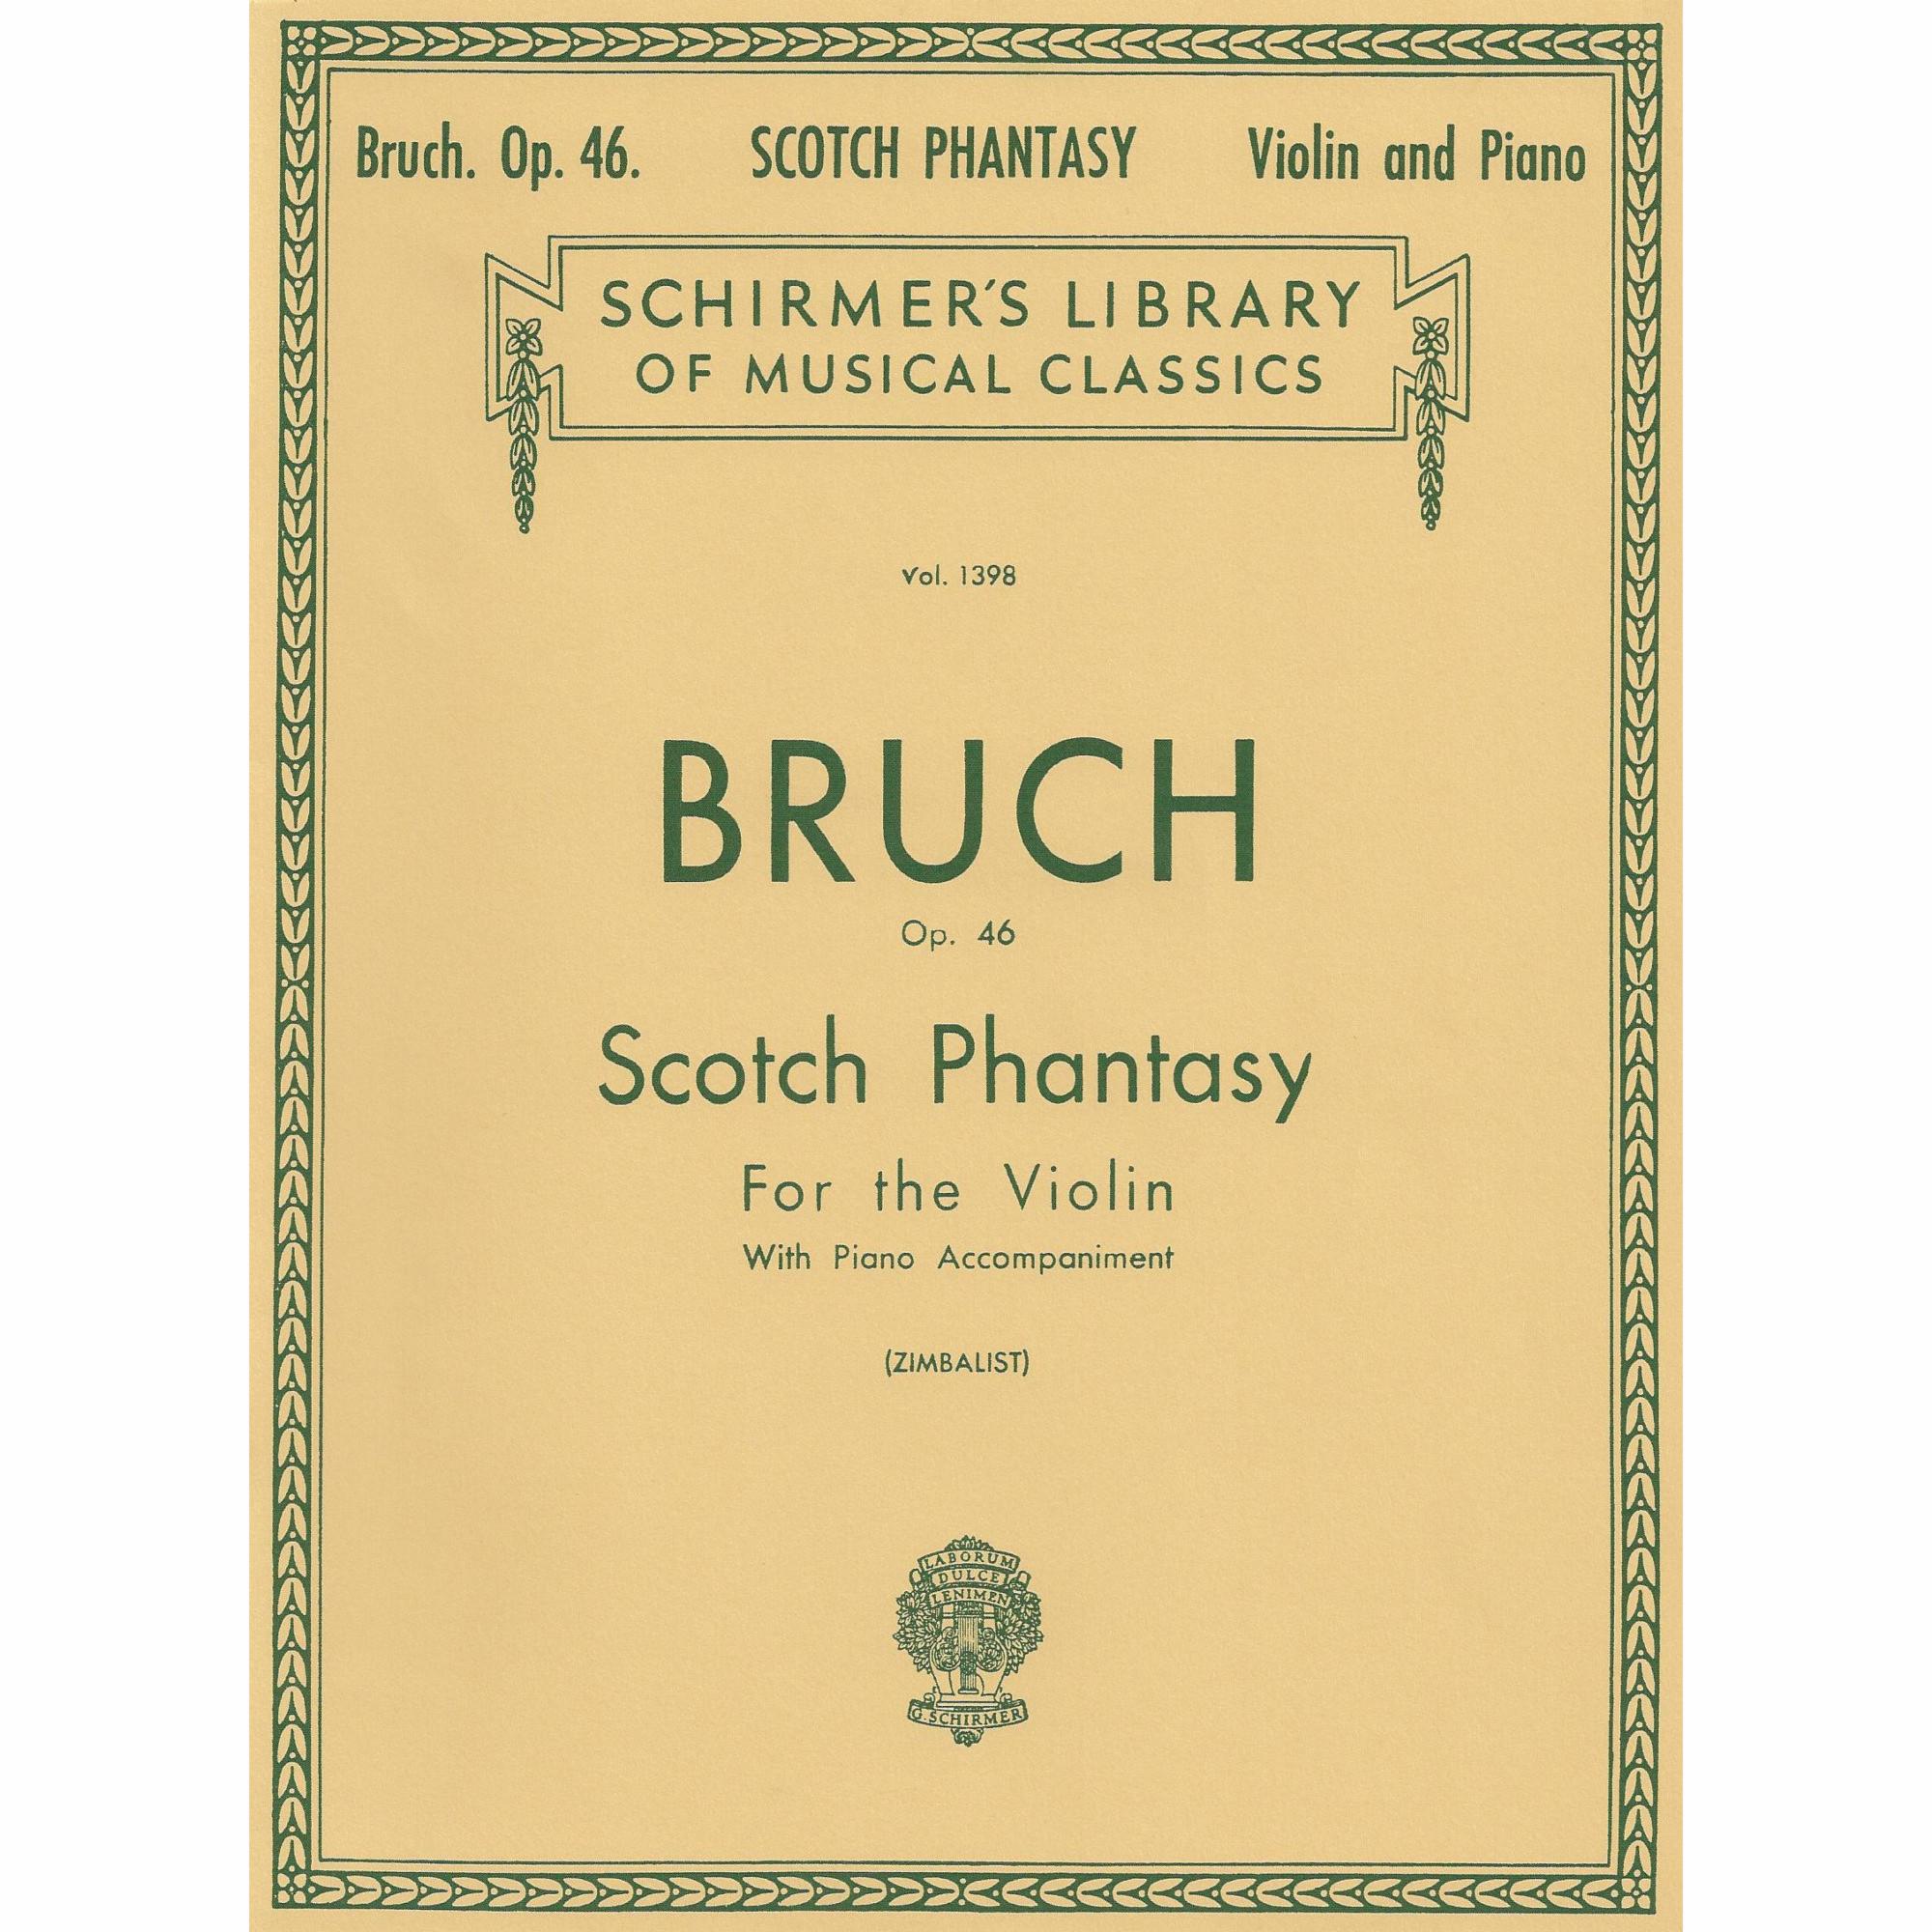 Bruch -- Scotch Phantasy, Op. 46 for Violin and Piano